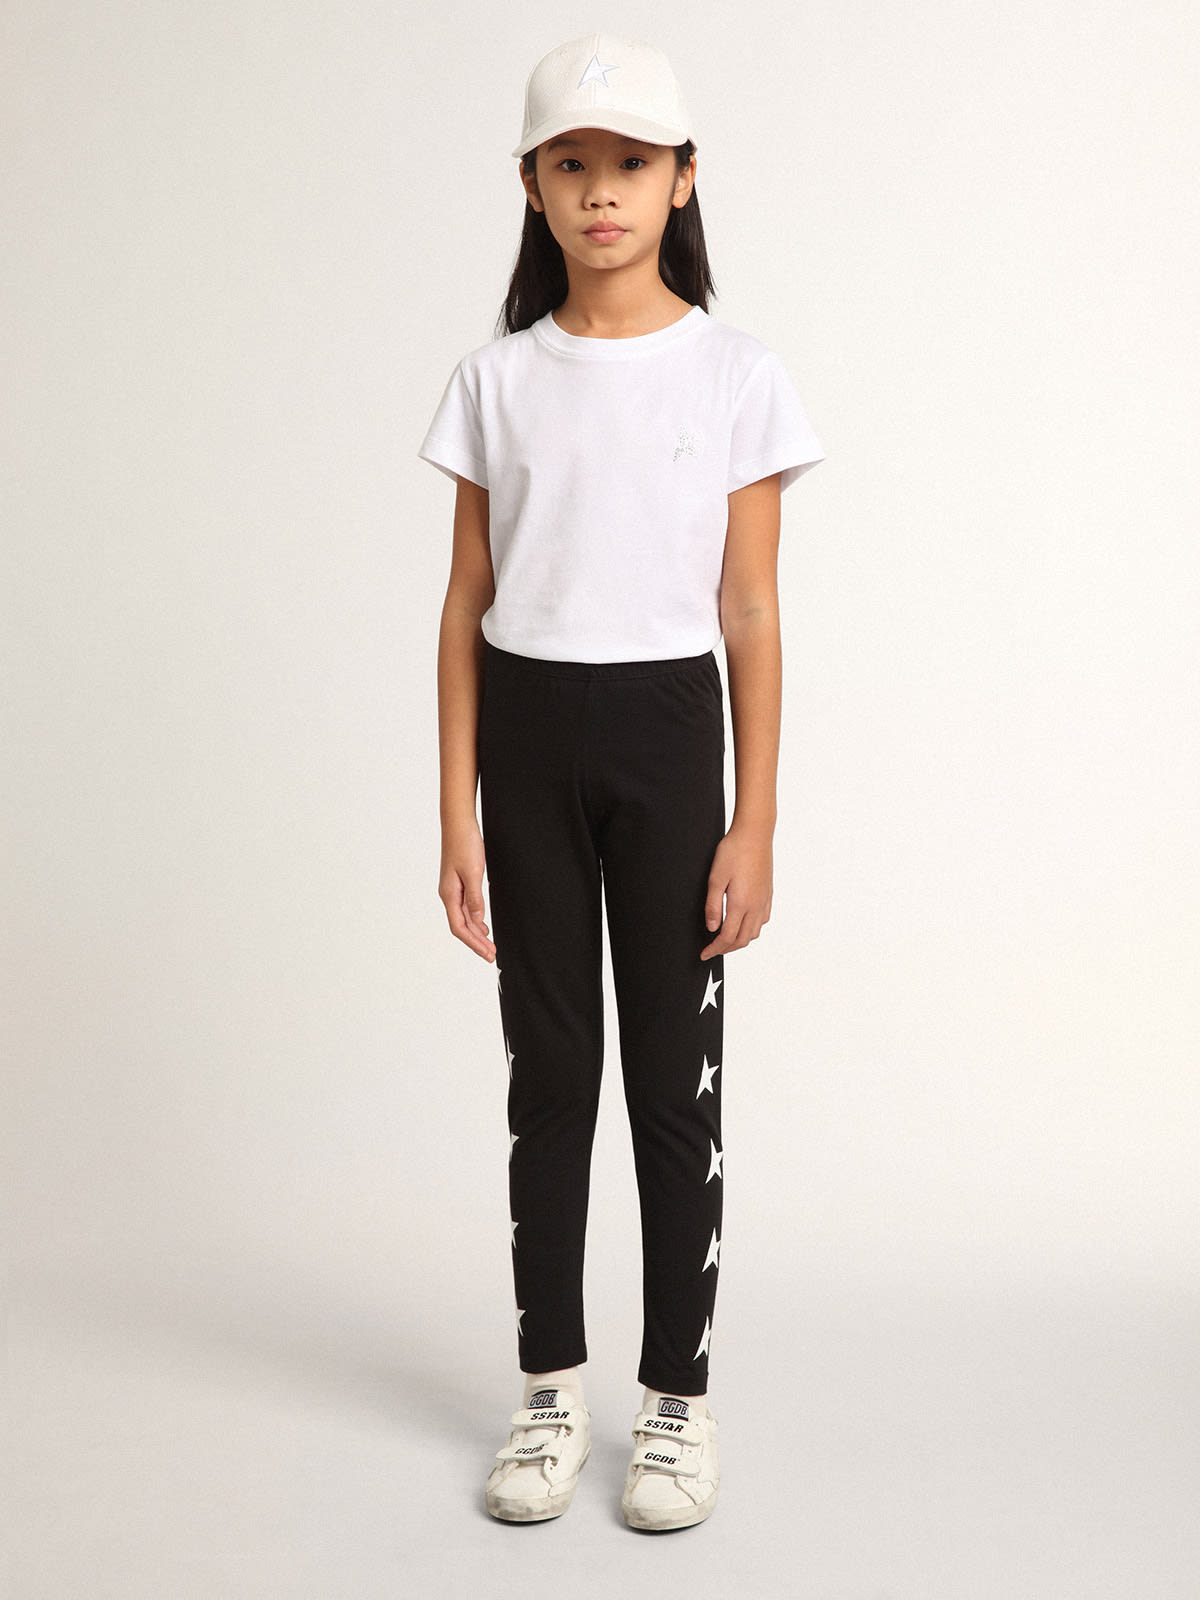 Golden Goose - Black Star Collection leggings with contrasting white stars in 